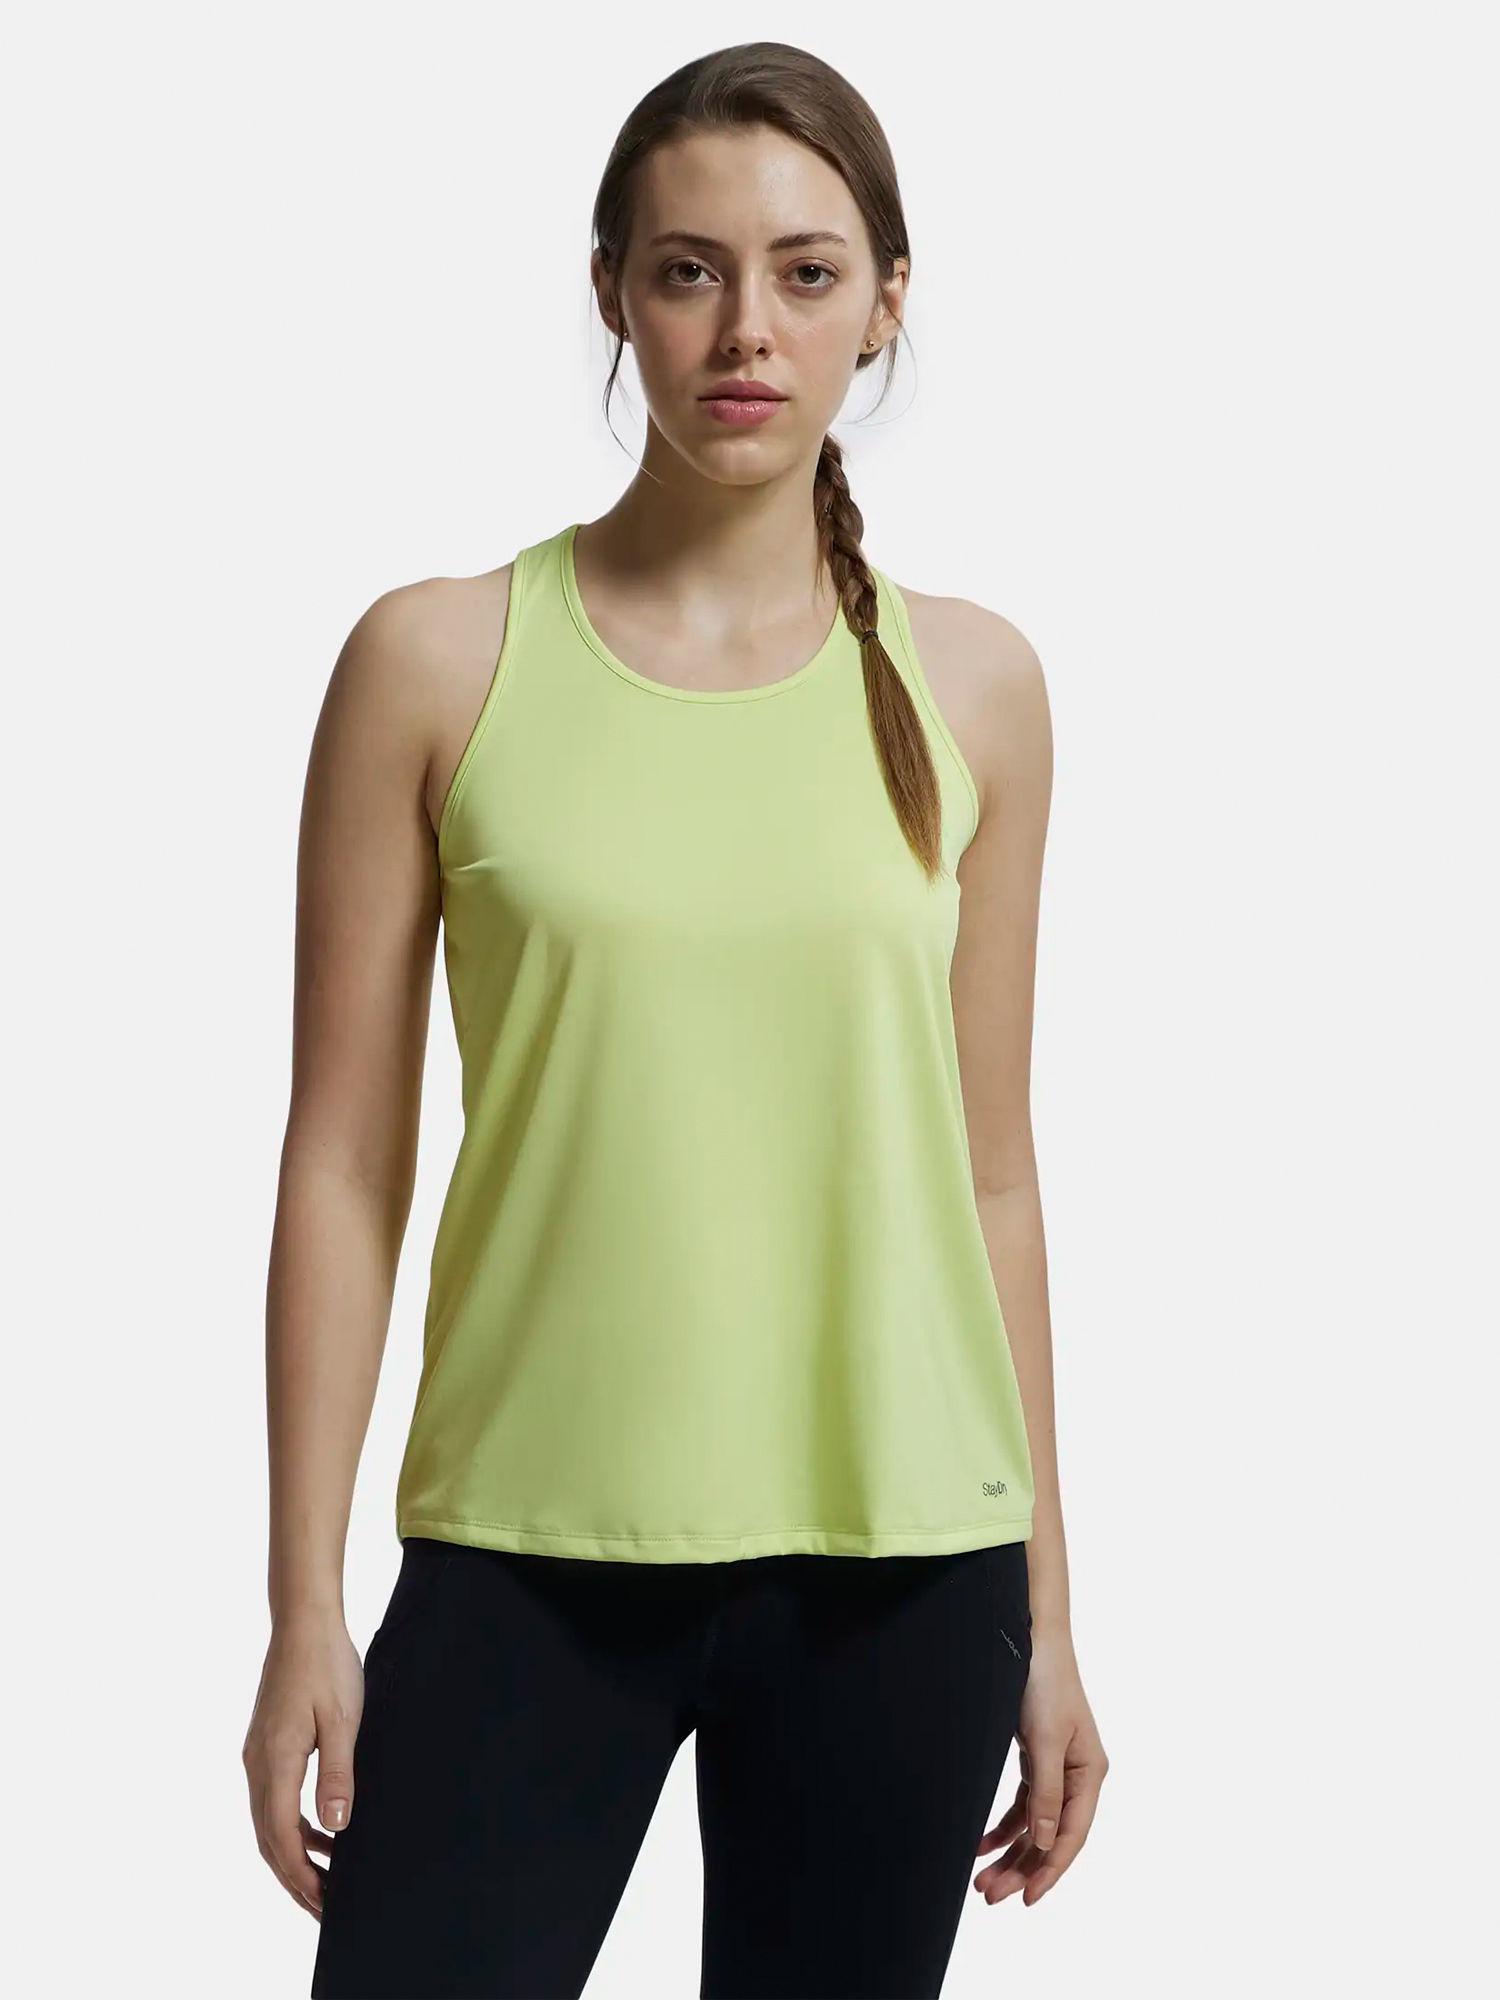 mw22 women's microfiber performance tank top with stay dry treatment green